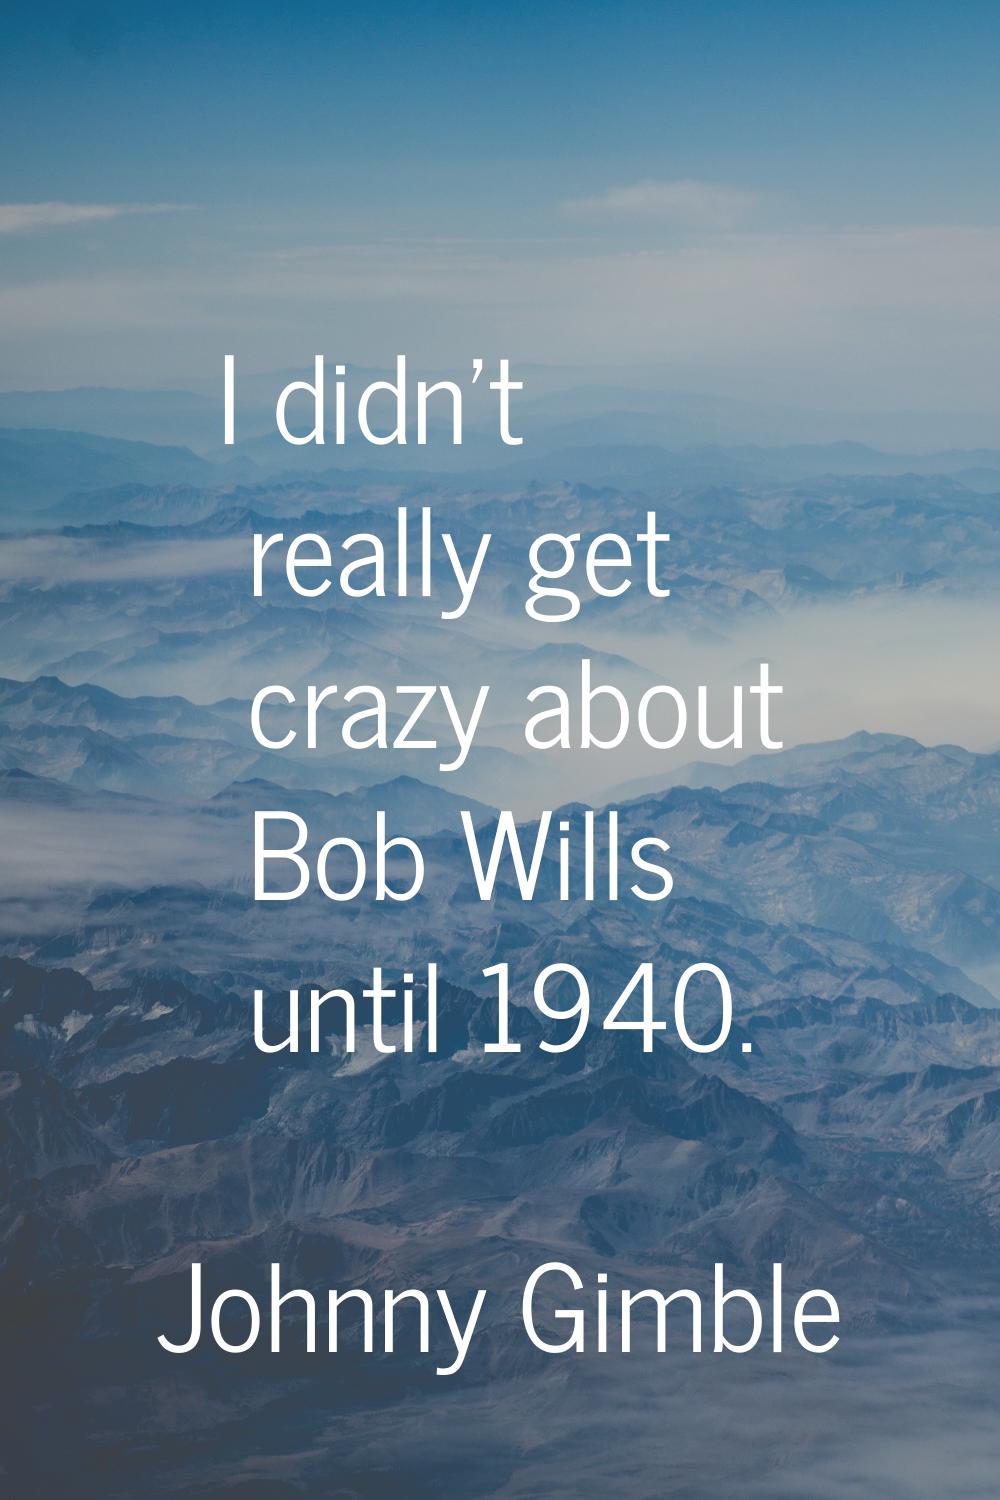 I didn't really get crazy about Bob Wills until 1940.